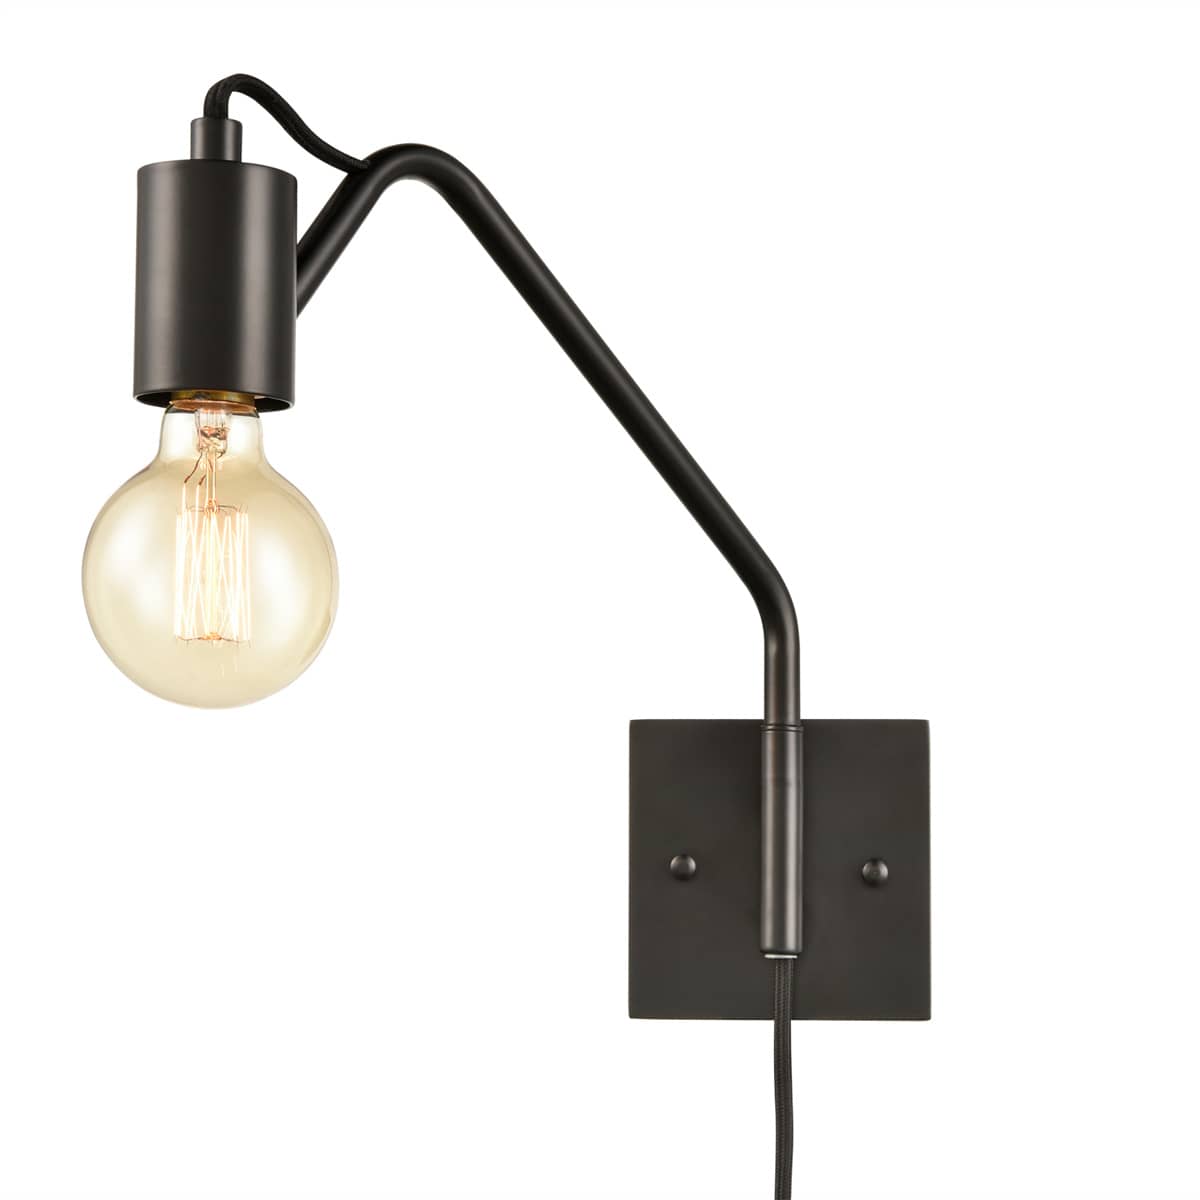 Modern Plug-in Wall Sconce Lighting Set of 2 with Switch, Black